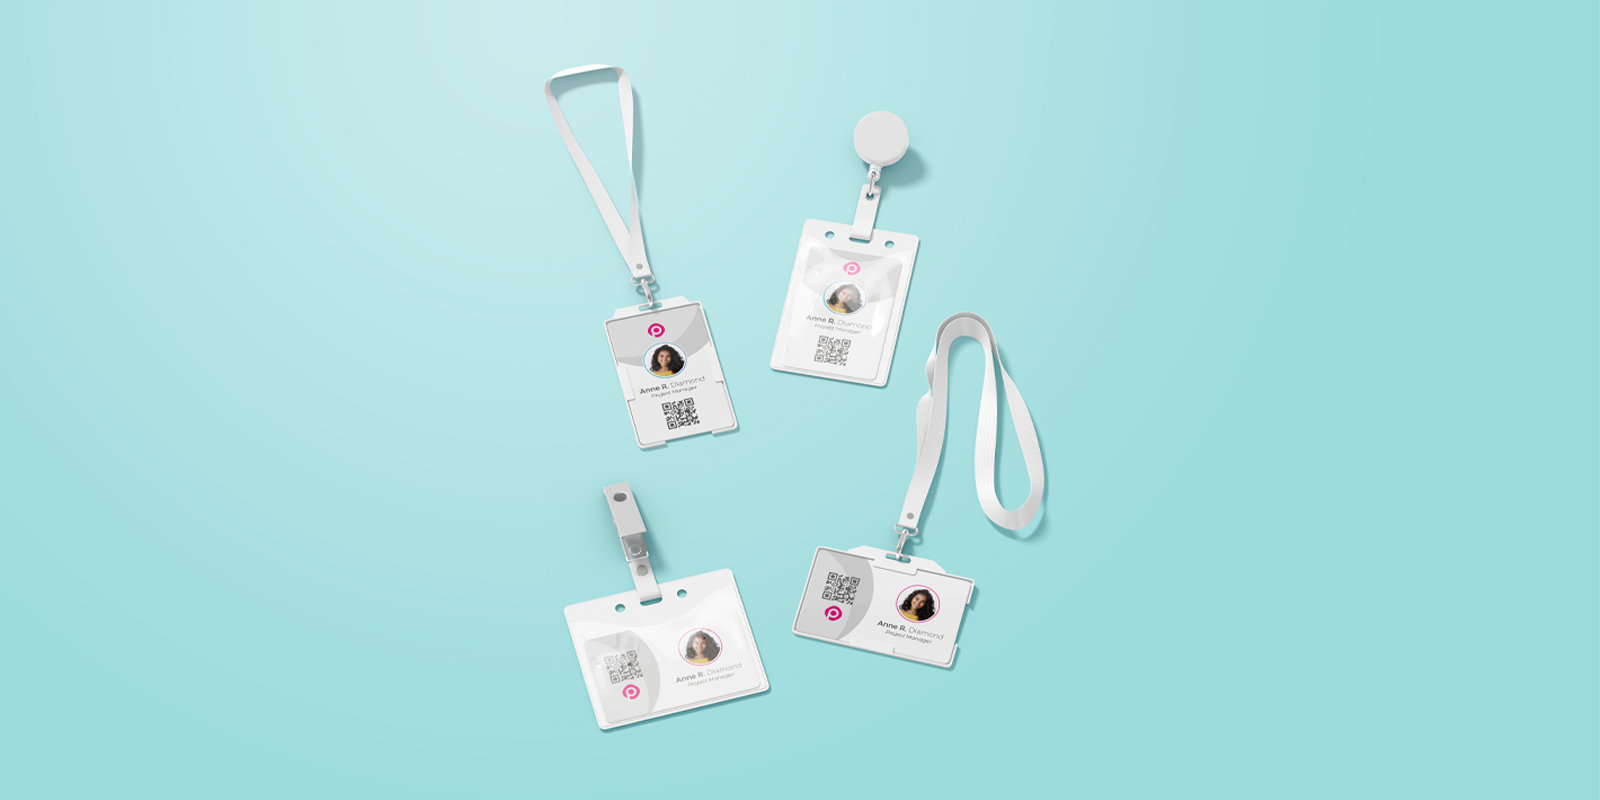 Badge holders in Toowoomba - Print with Pagerr